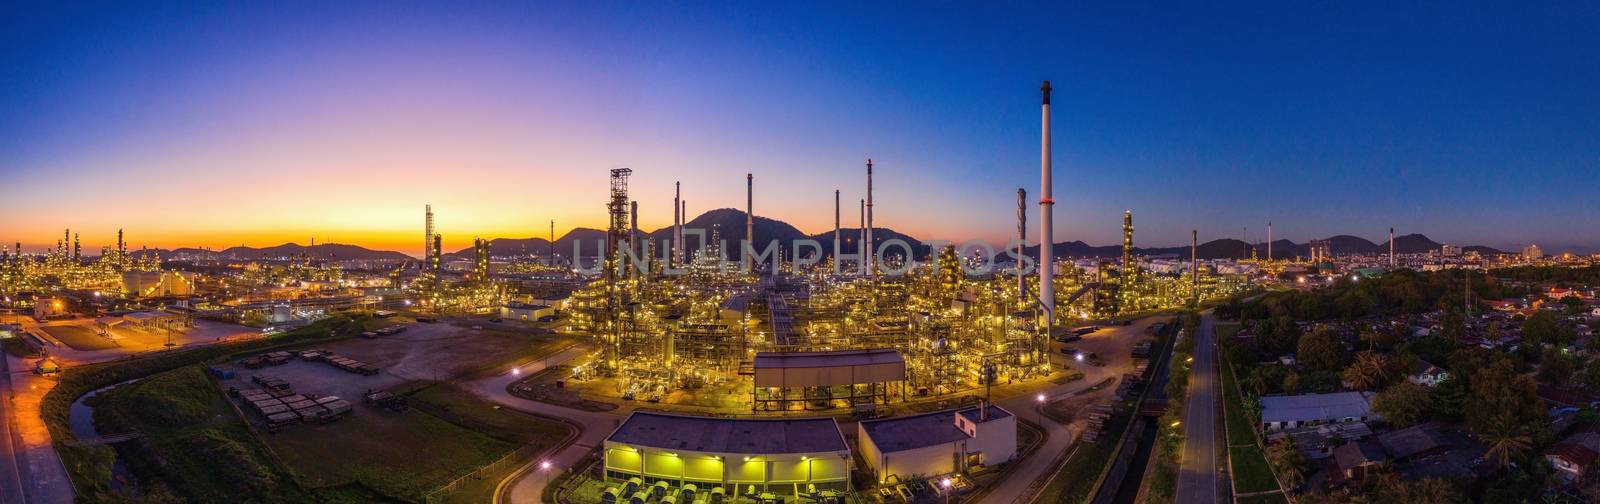 Aerial view of Oil refinery, Panorama of Oil Industry. by gutarphotoghaphy